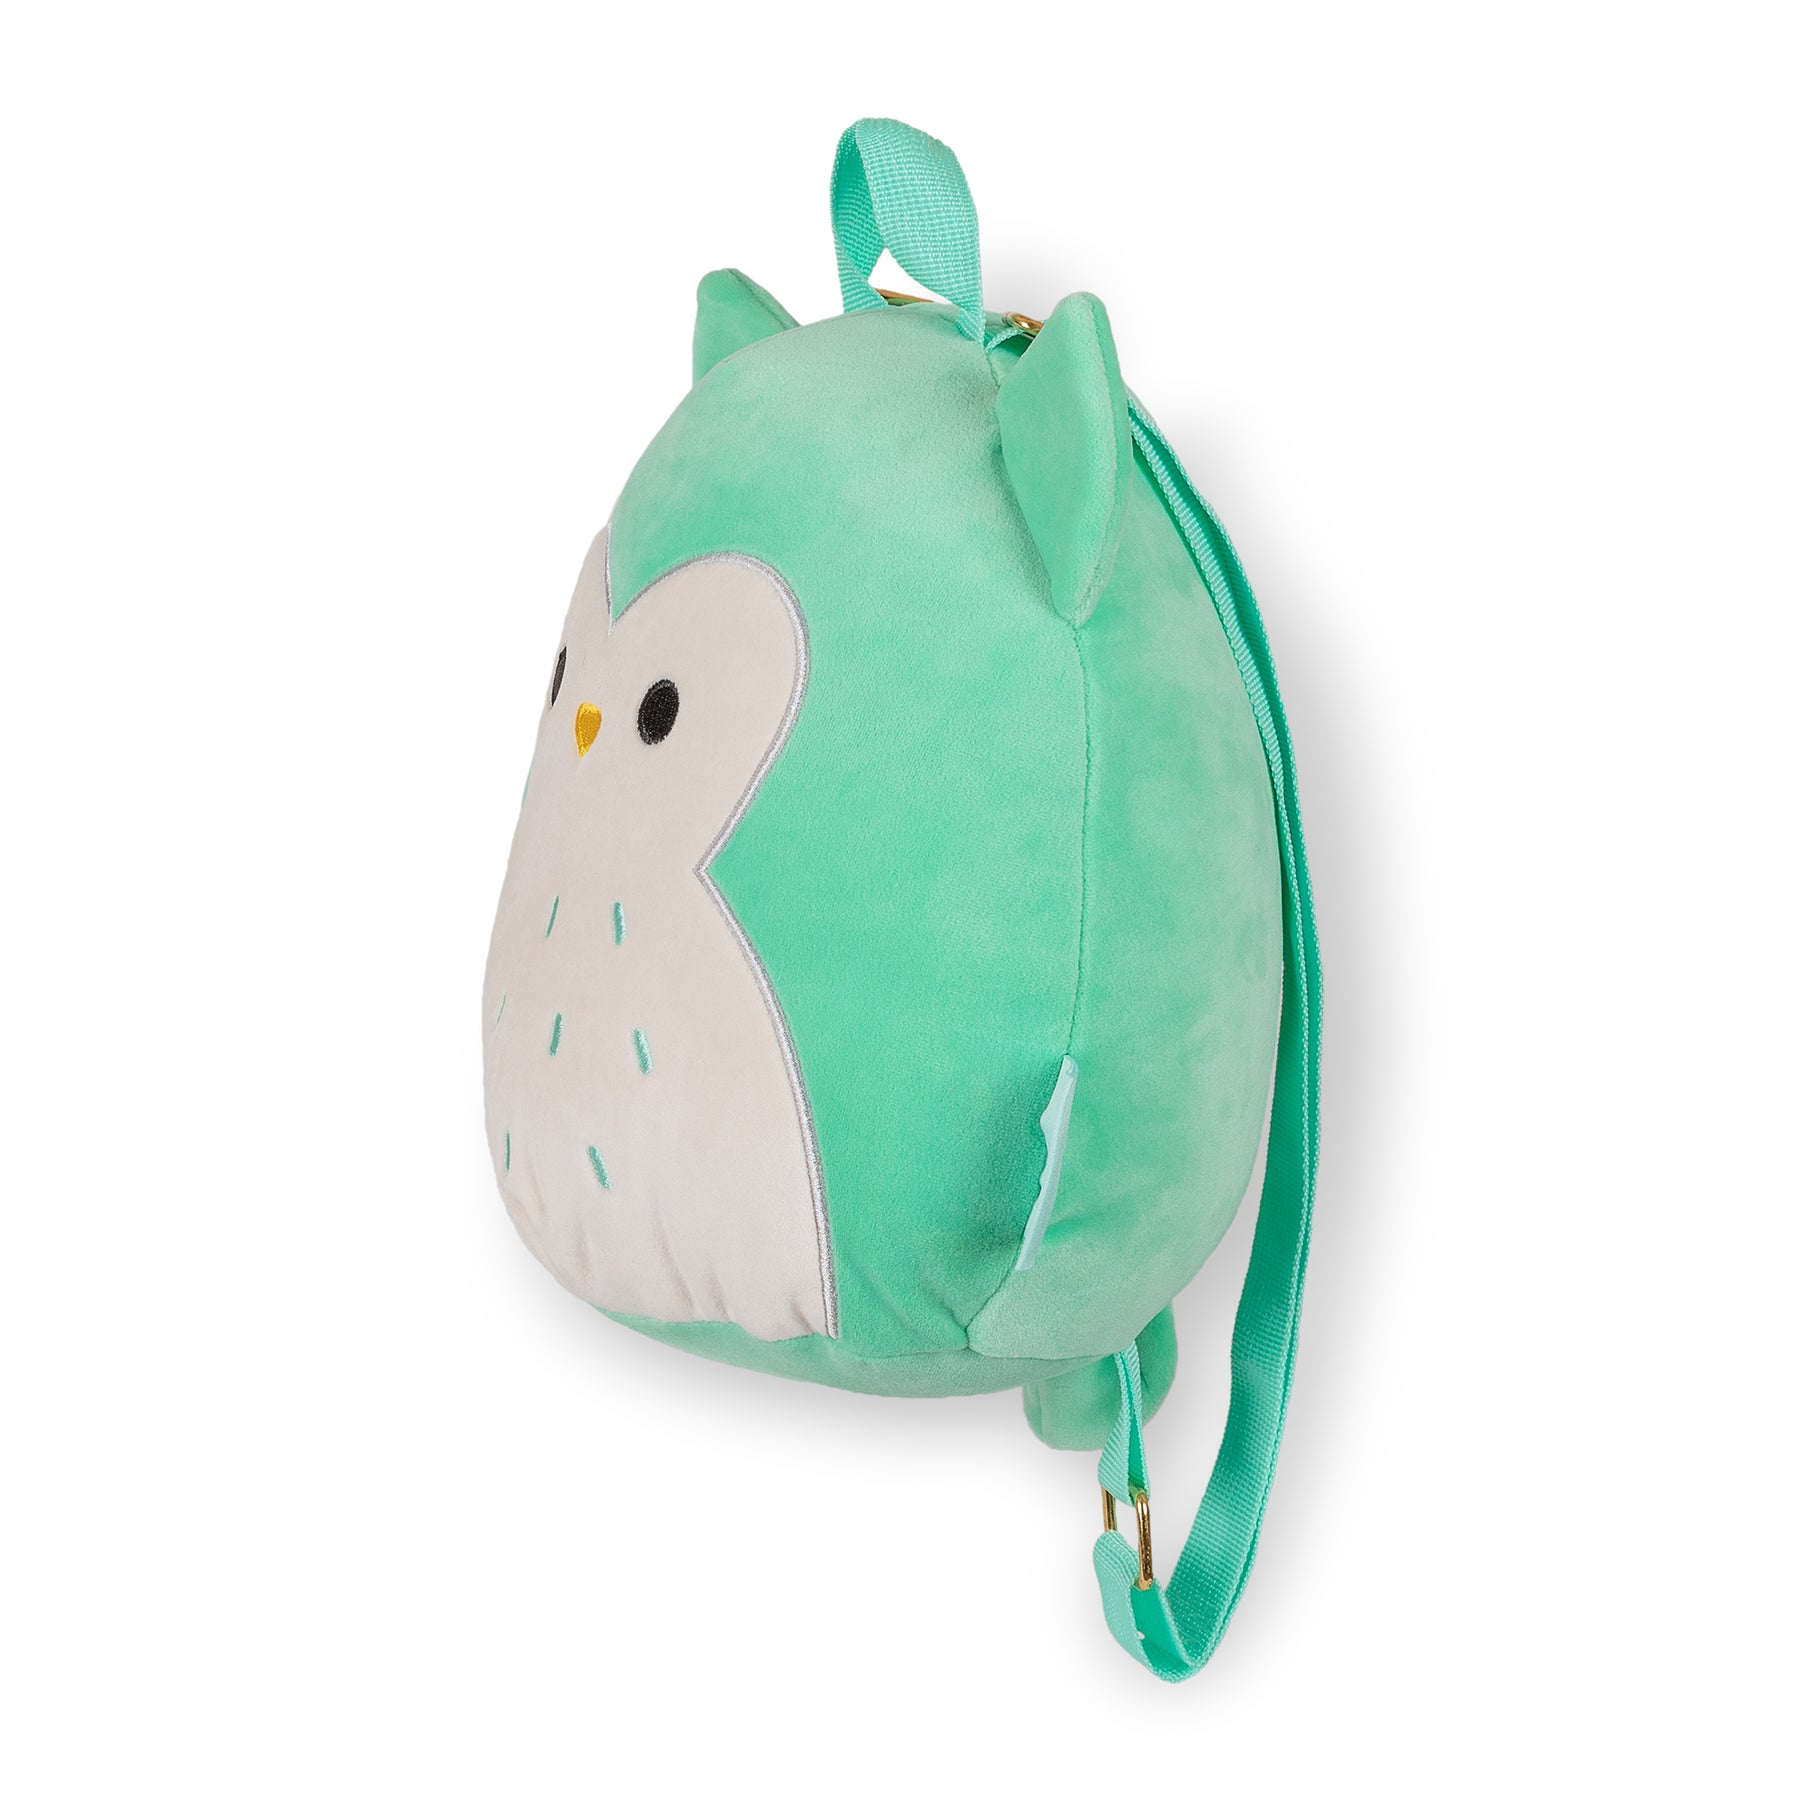 Carry Me Winston the Teal Owl Squishmallow